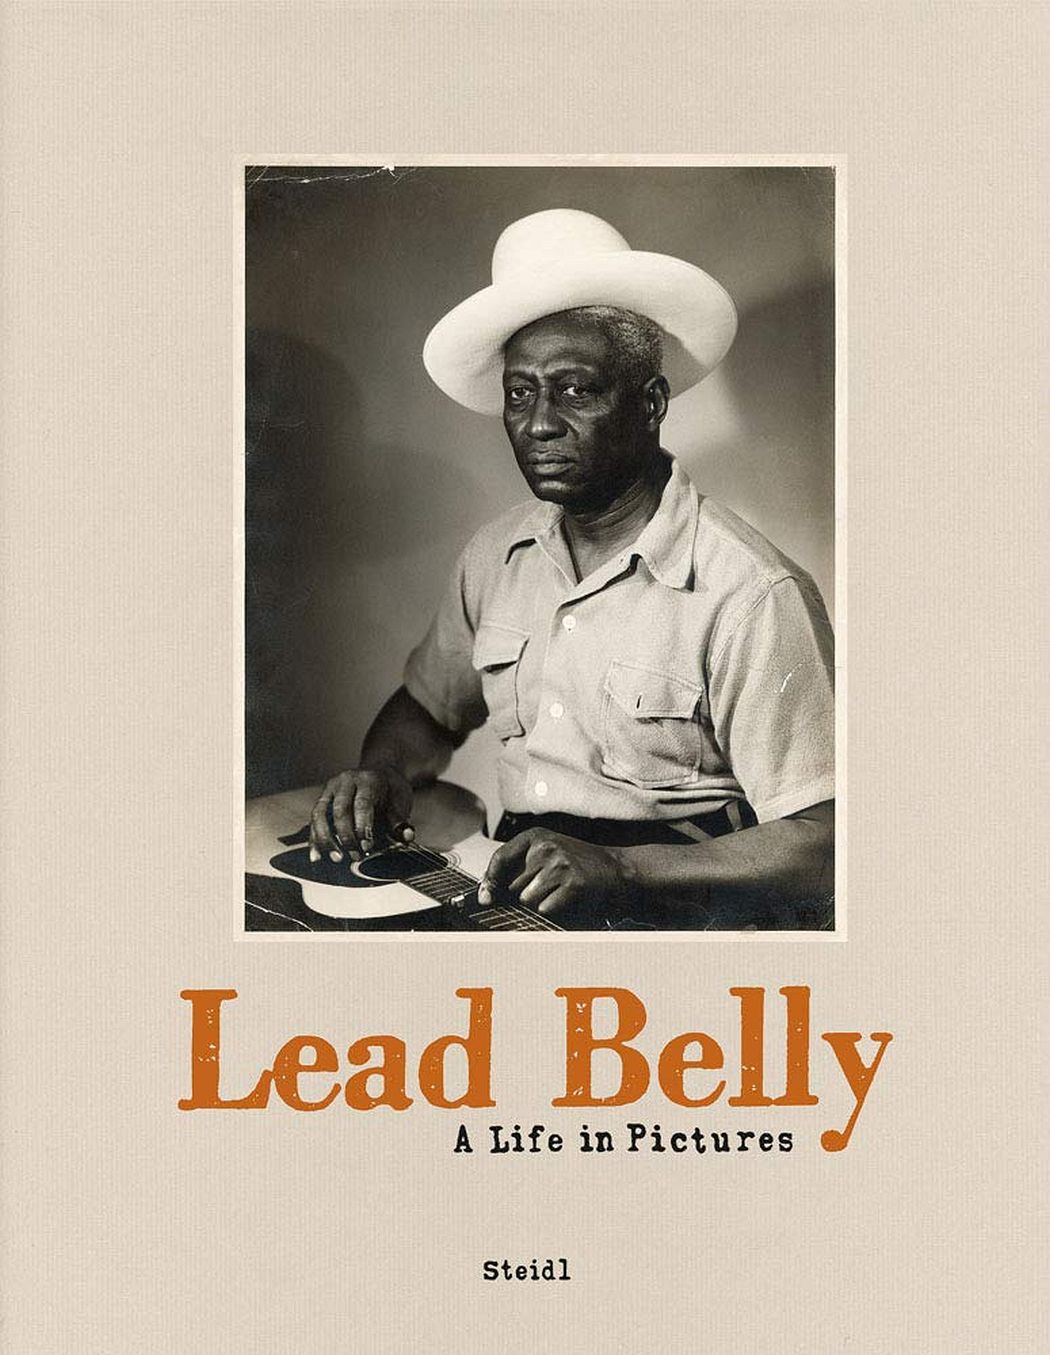 Lead Belly: A Life in Pictures